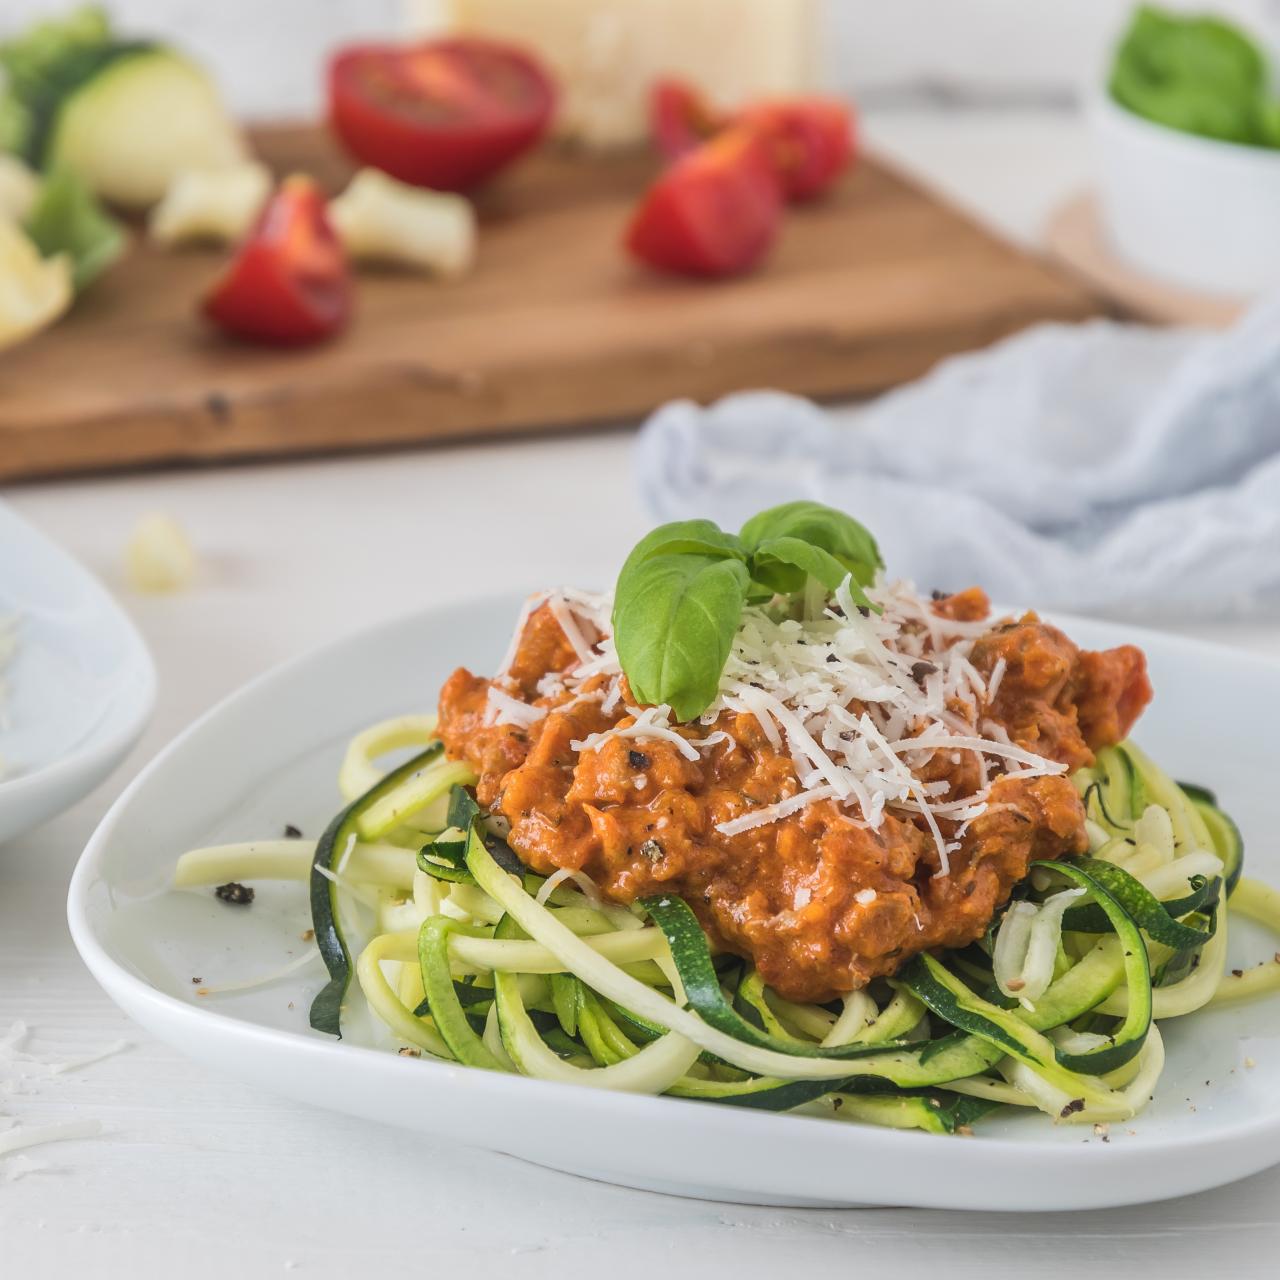 https://food.fnr.sndimg.com/content/dam/images/food/fullset/2021/02/23/zucchini-noodles-with-meat-suace.jpg.rend.hgtvcom.1280.1280.suffix/1614109219287.jpeg